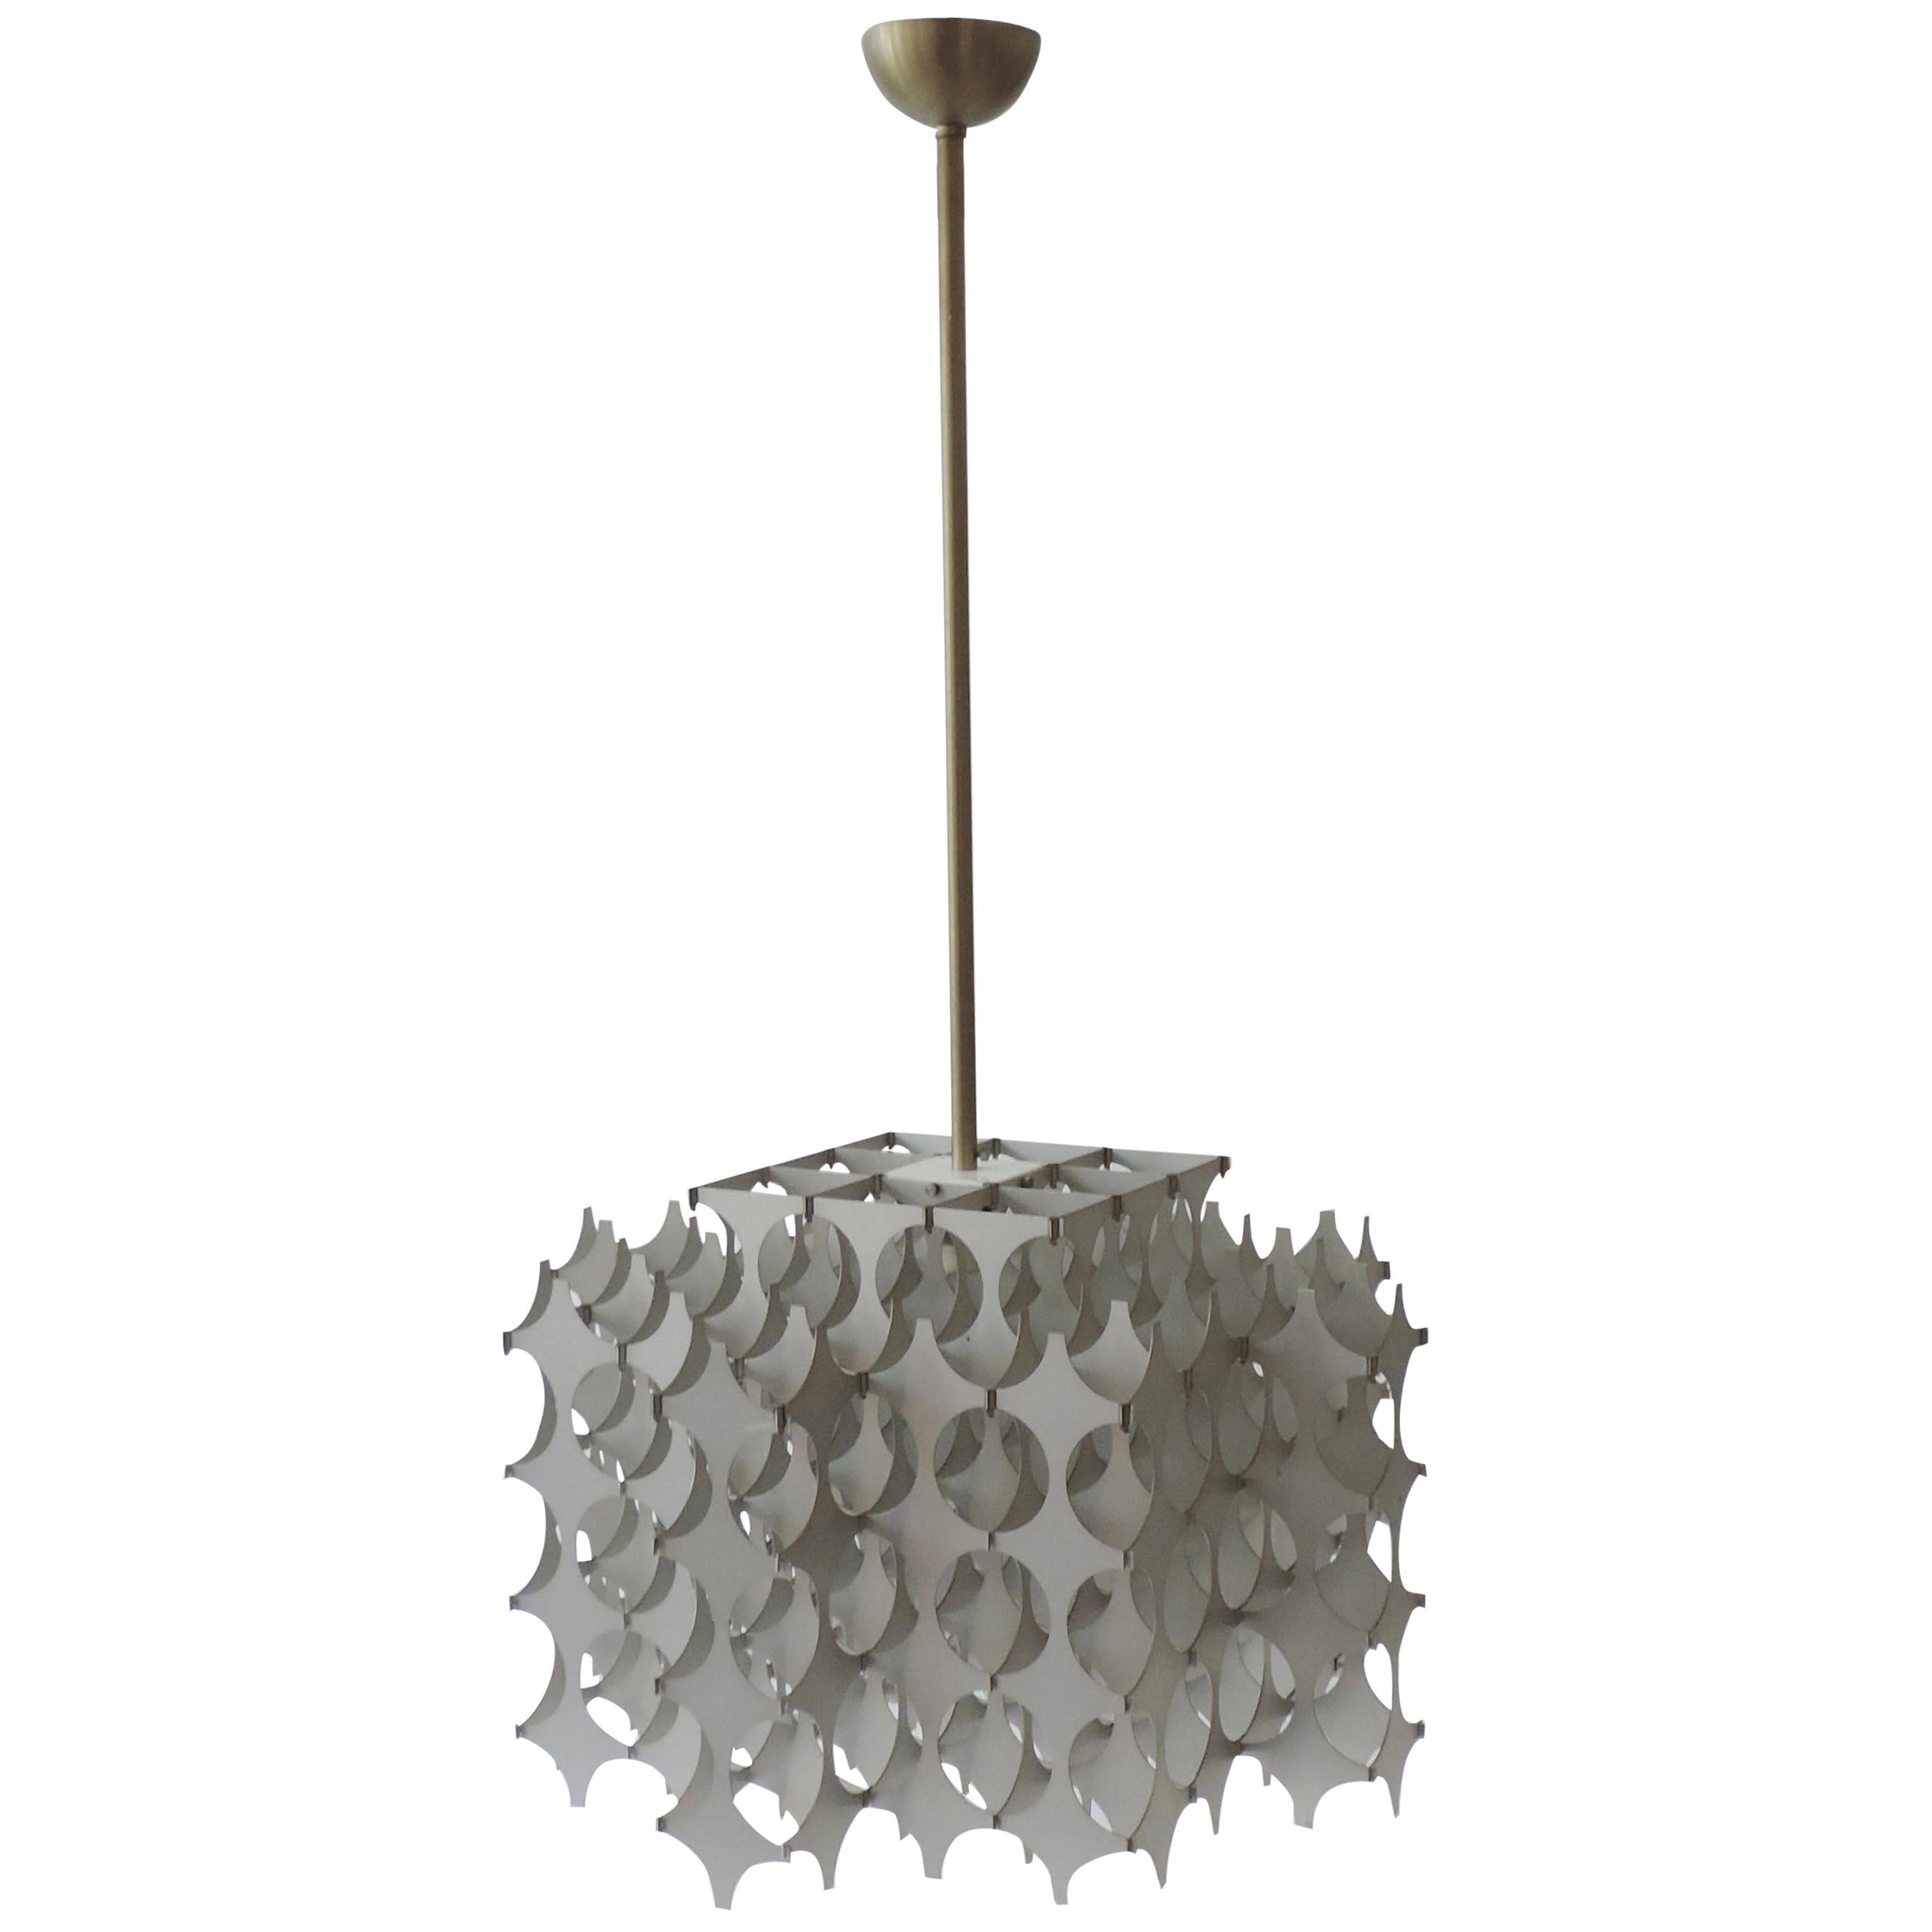 Mario Marenco Kinetic Ceiling Lamp Mod. Cynthia for Artemide, Italy, 1968